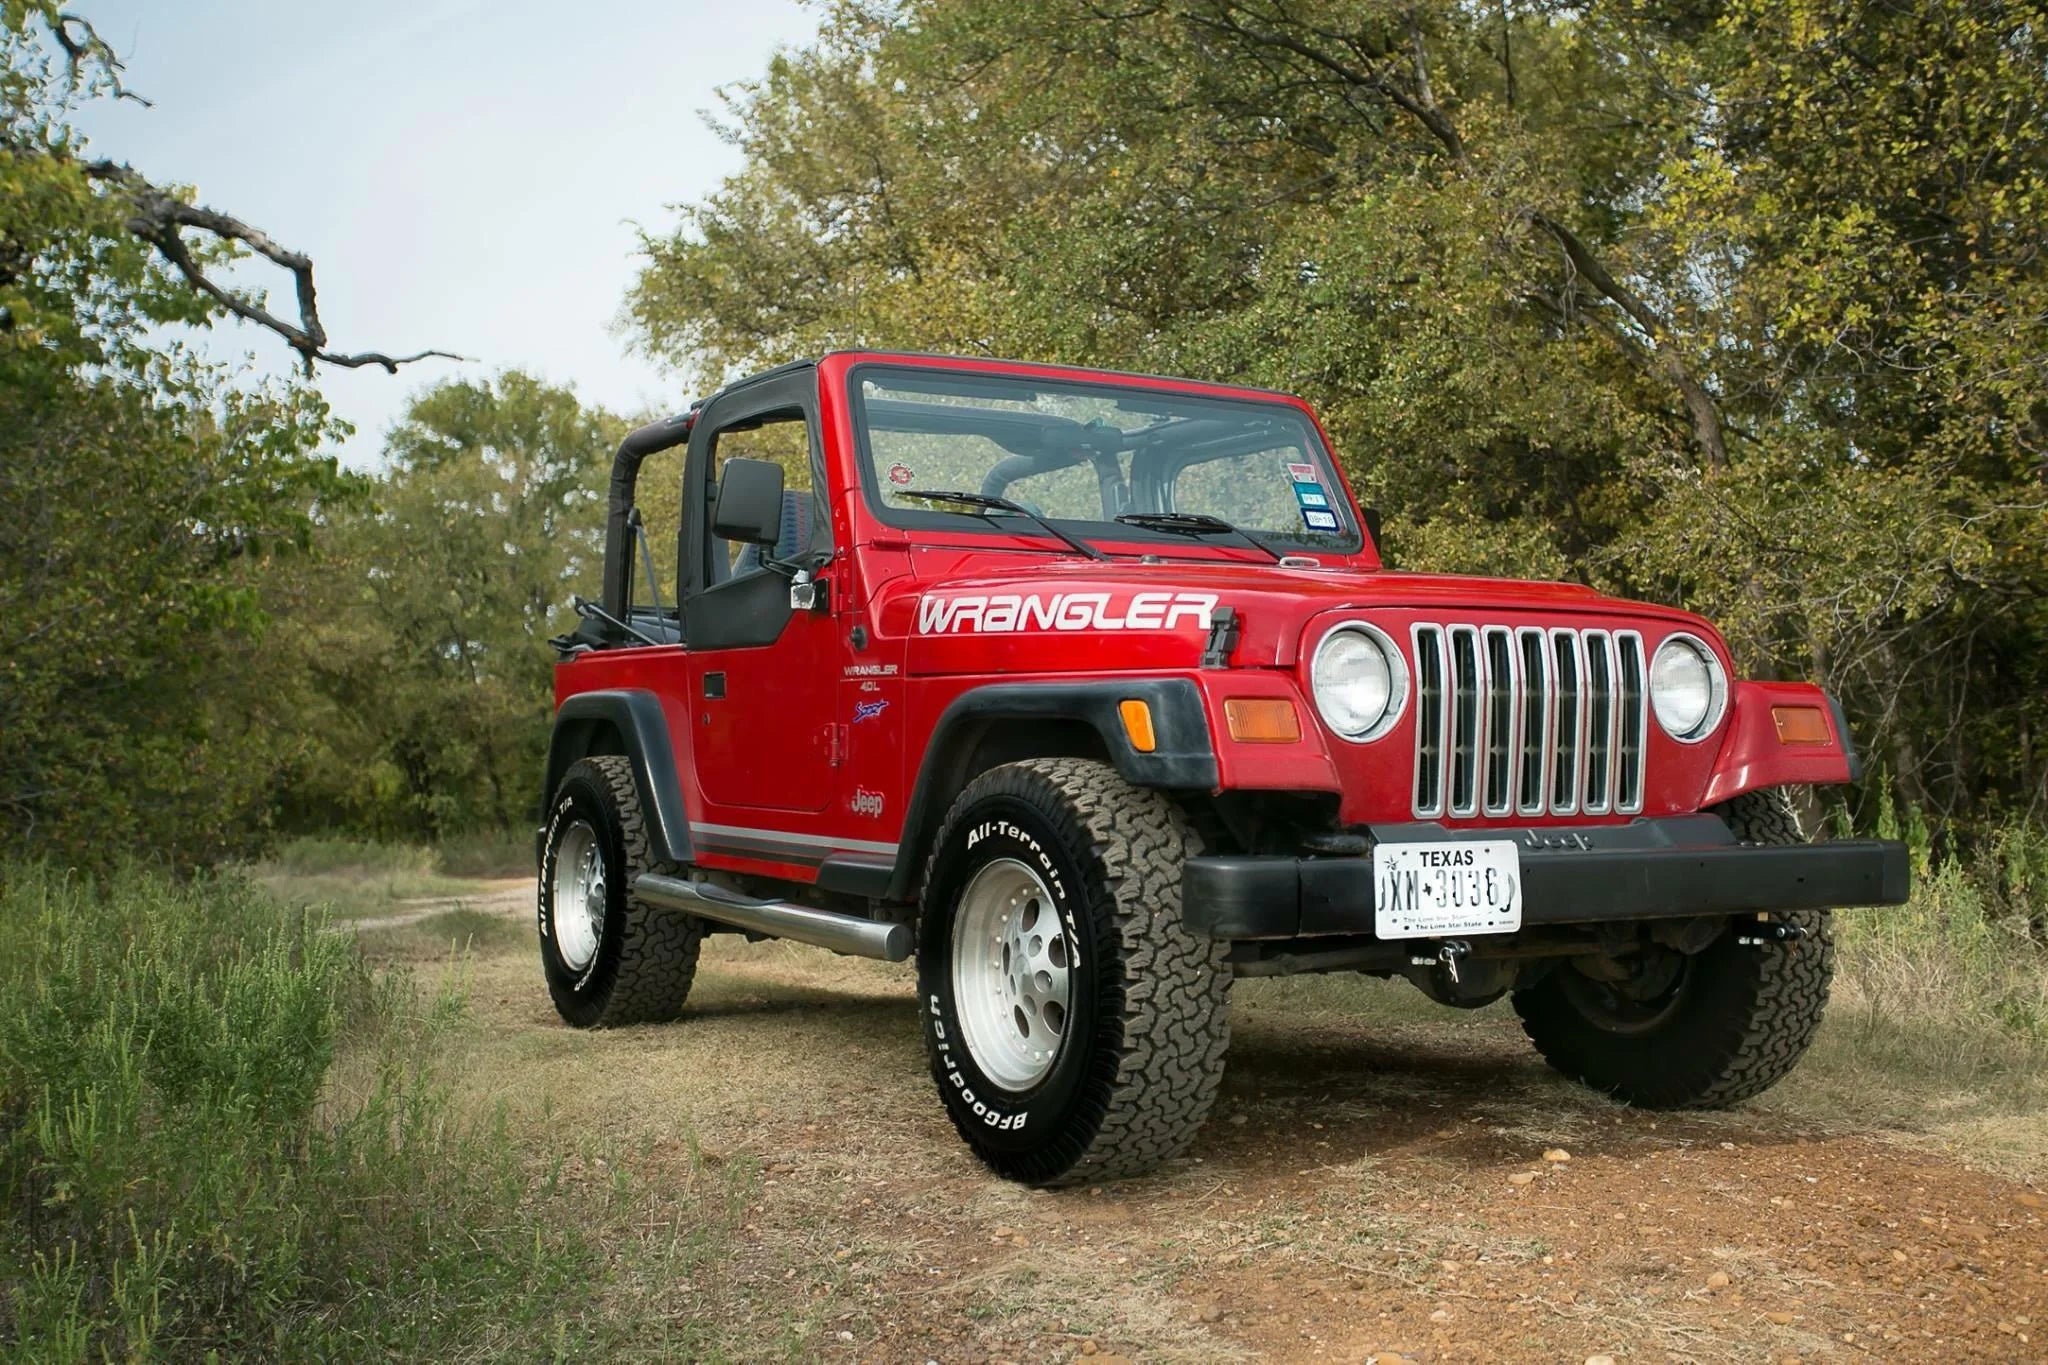 1997 (TJ) - Introduction of Coil Spring Suspension